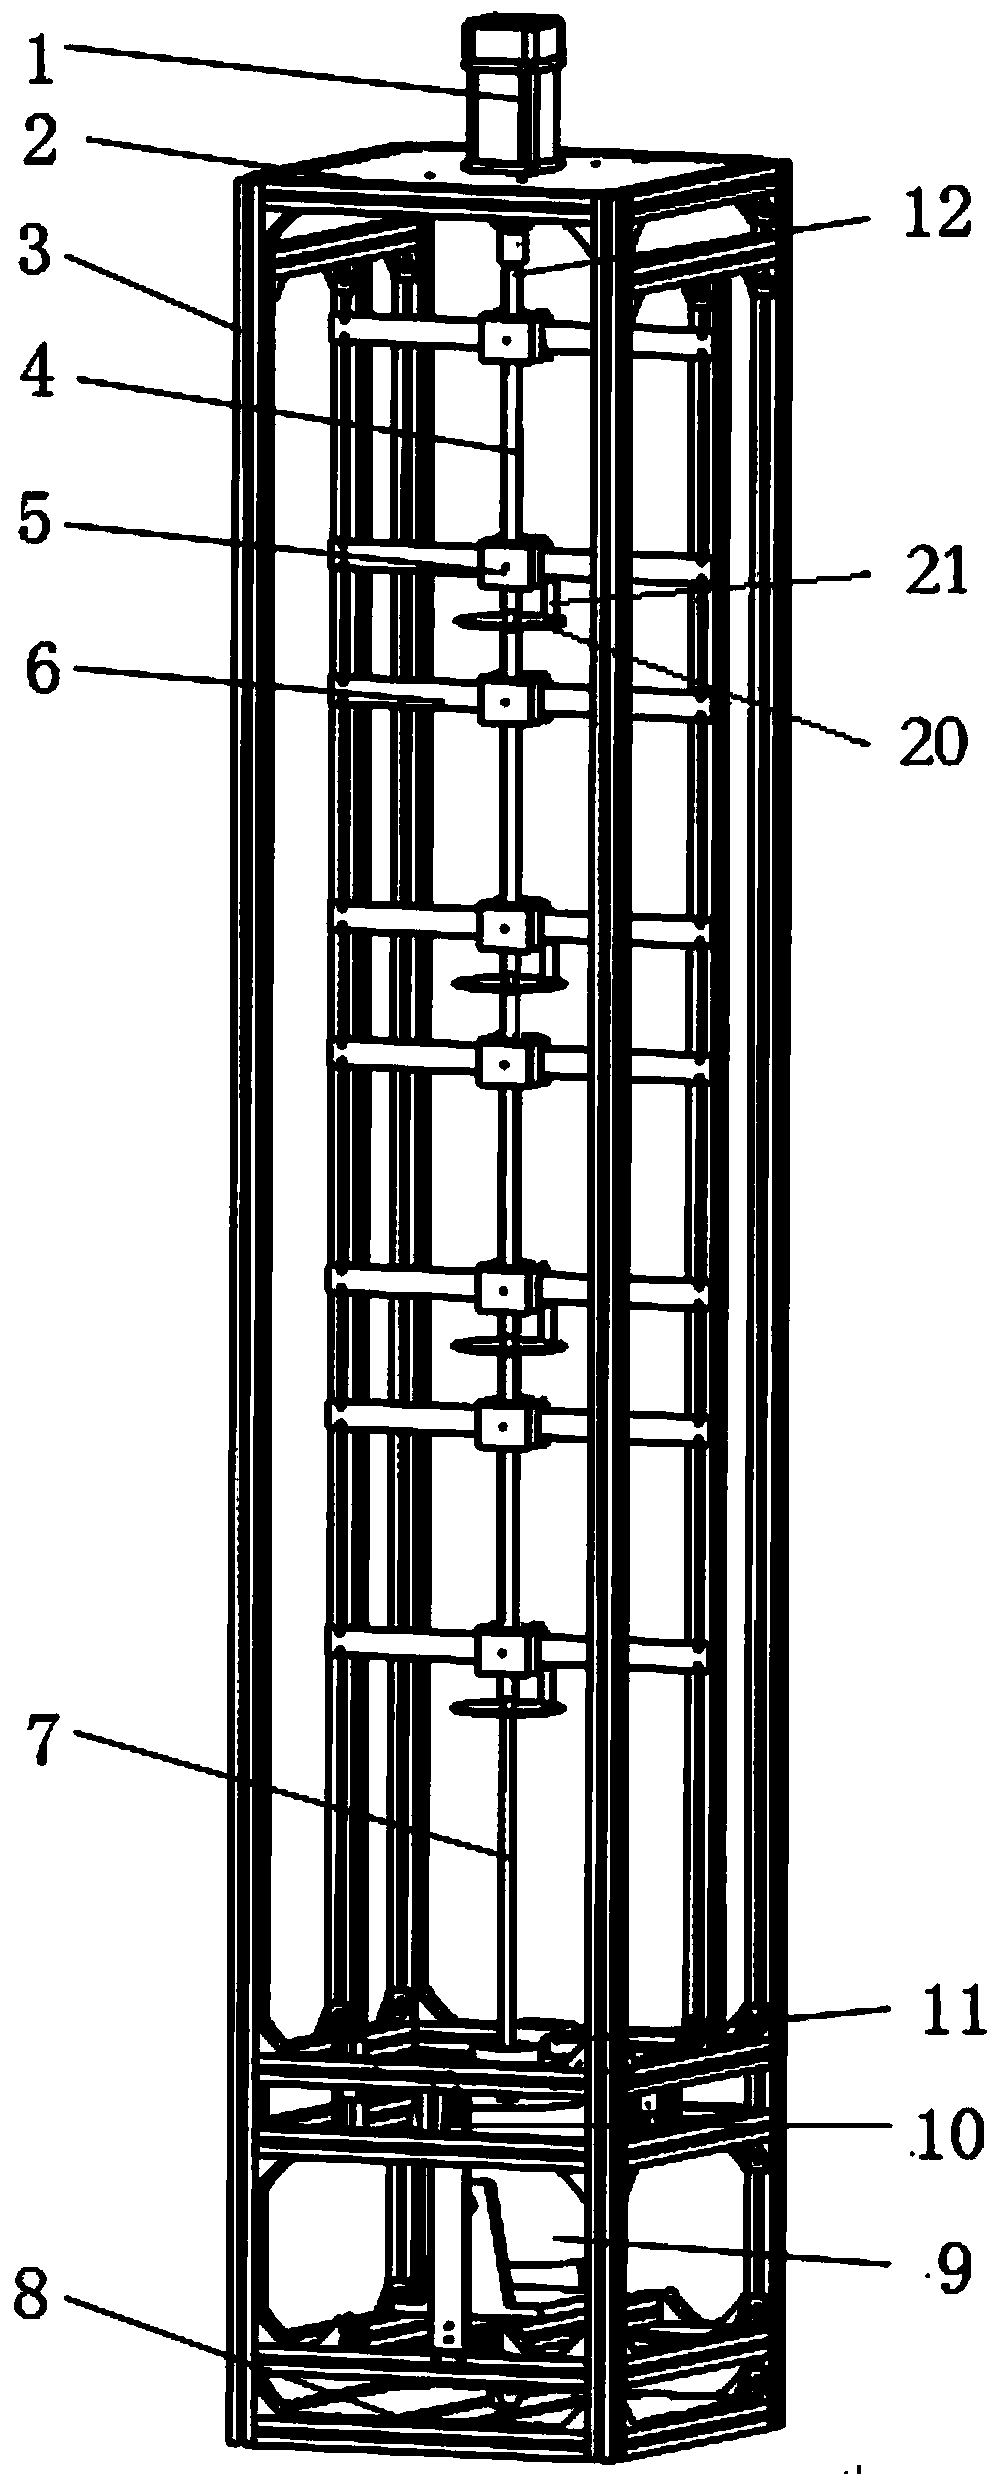 Experimental device for researching drill column dynamic characteristic